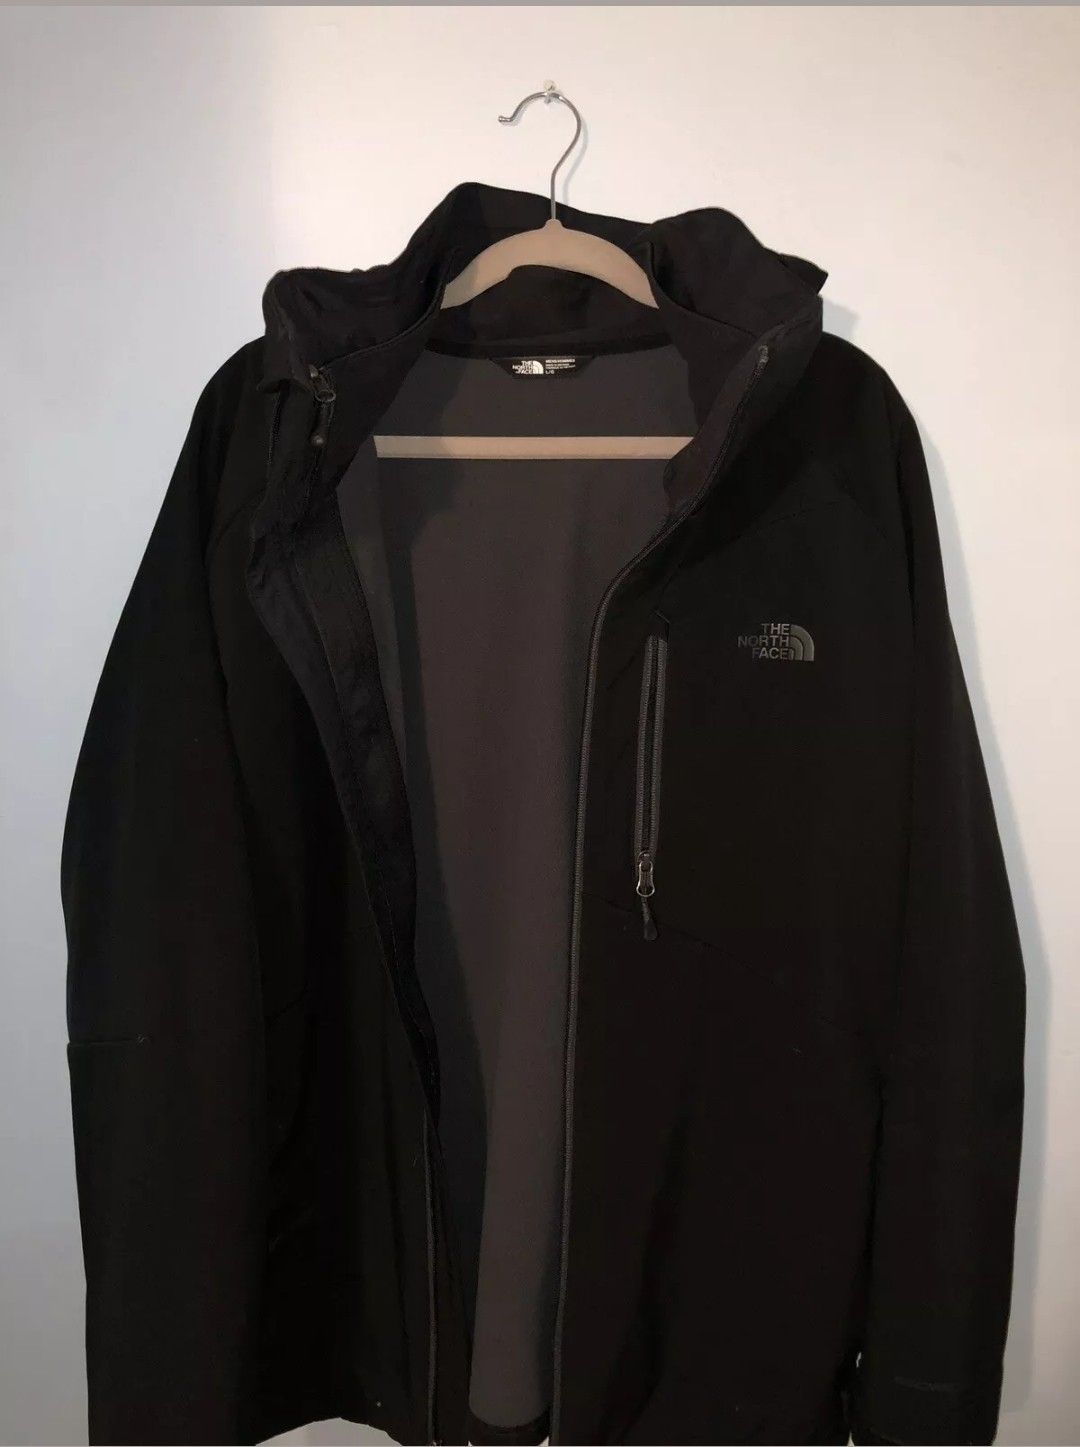 NWT Mens North Face Apex Storm Peak Triclimate Jacket Large 3 in 1 TNF Black